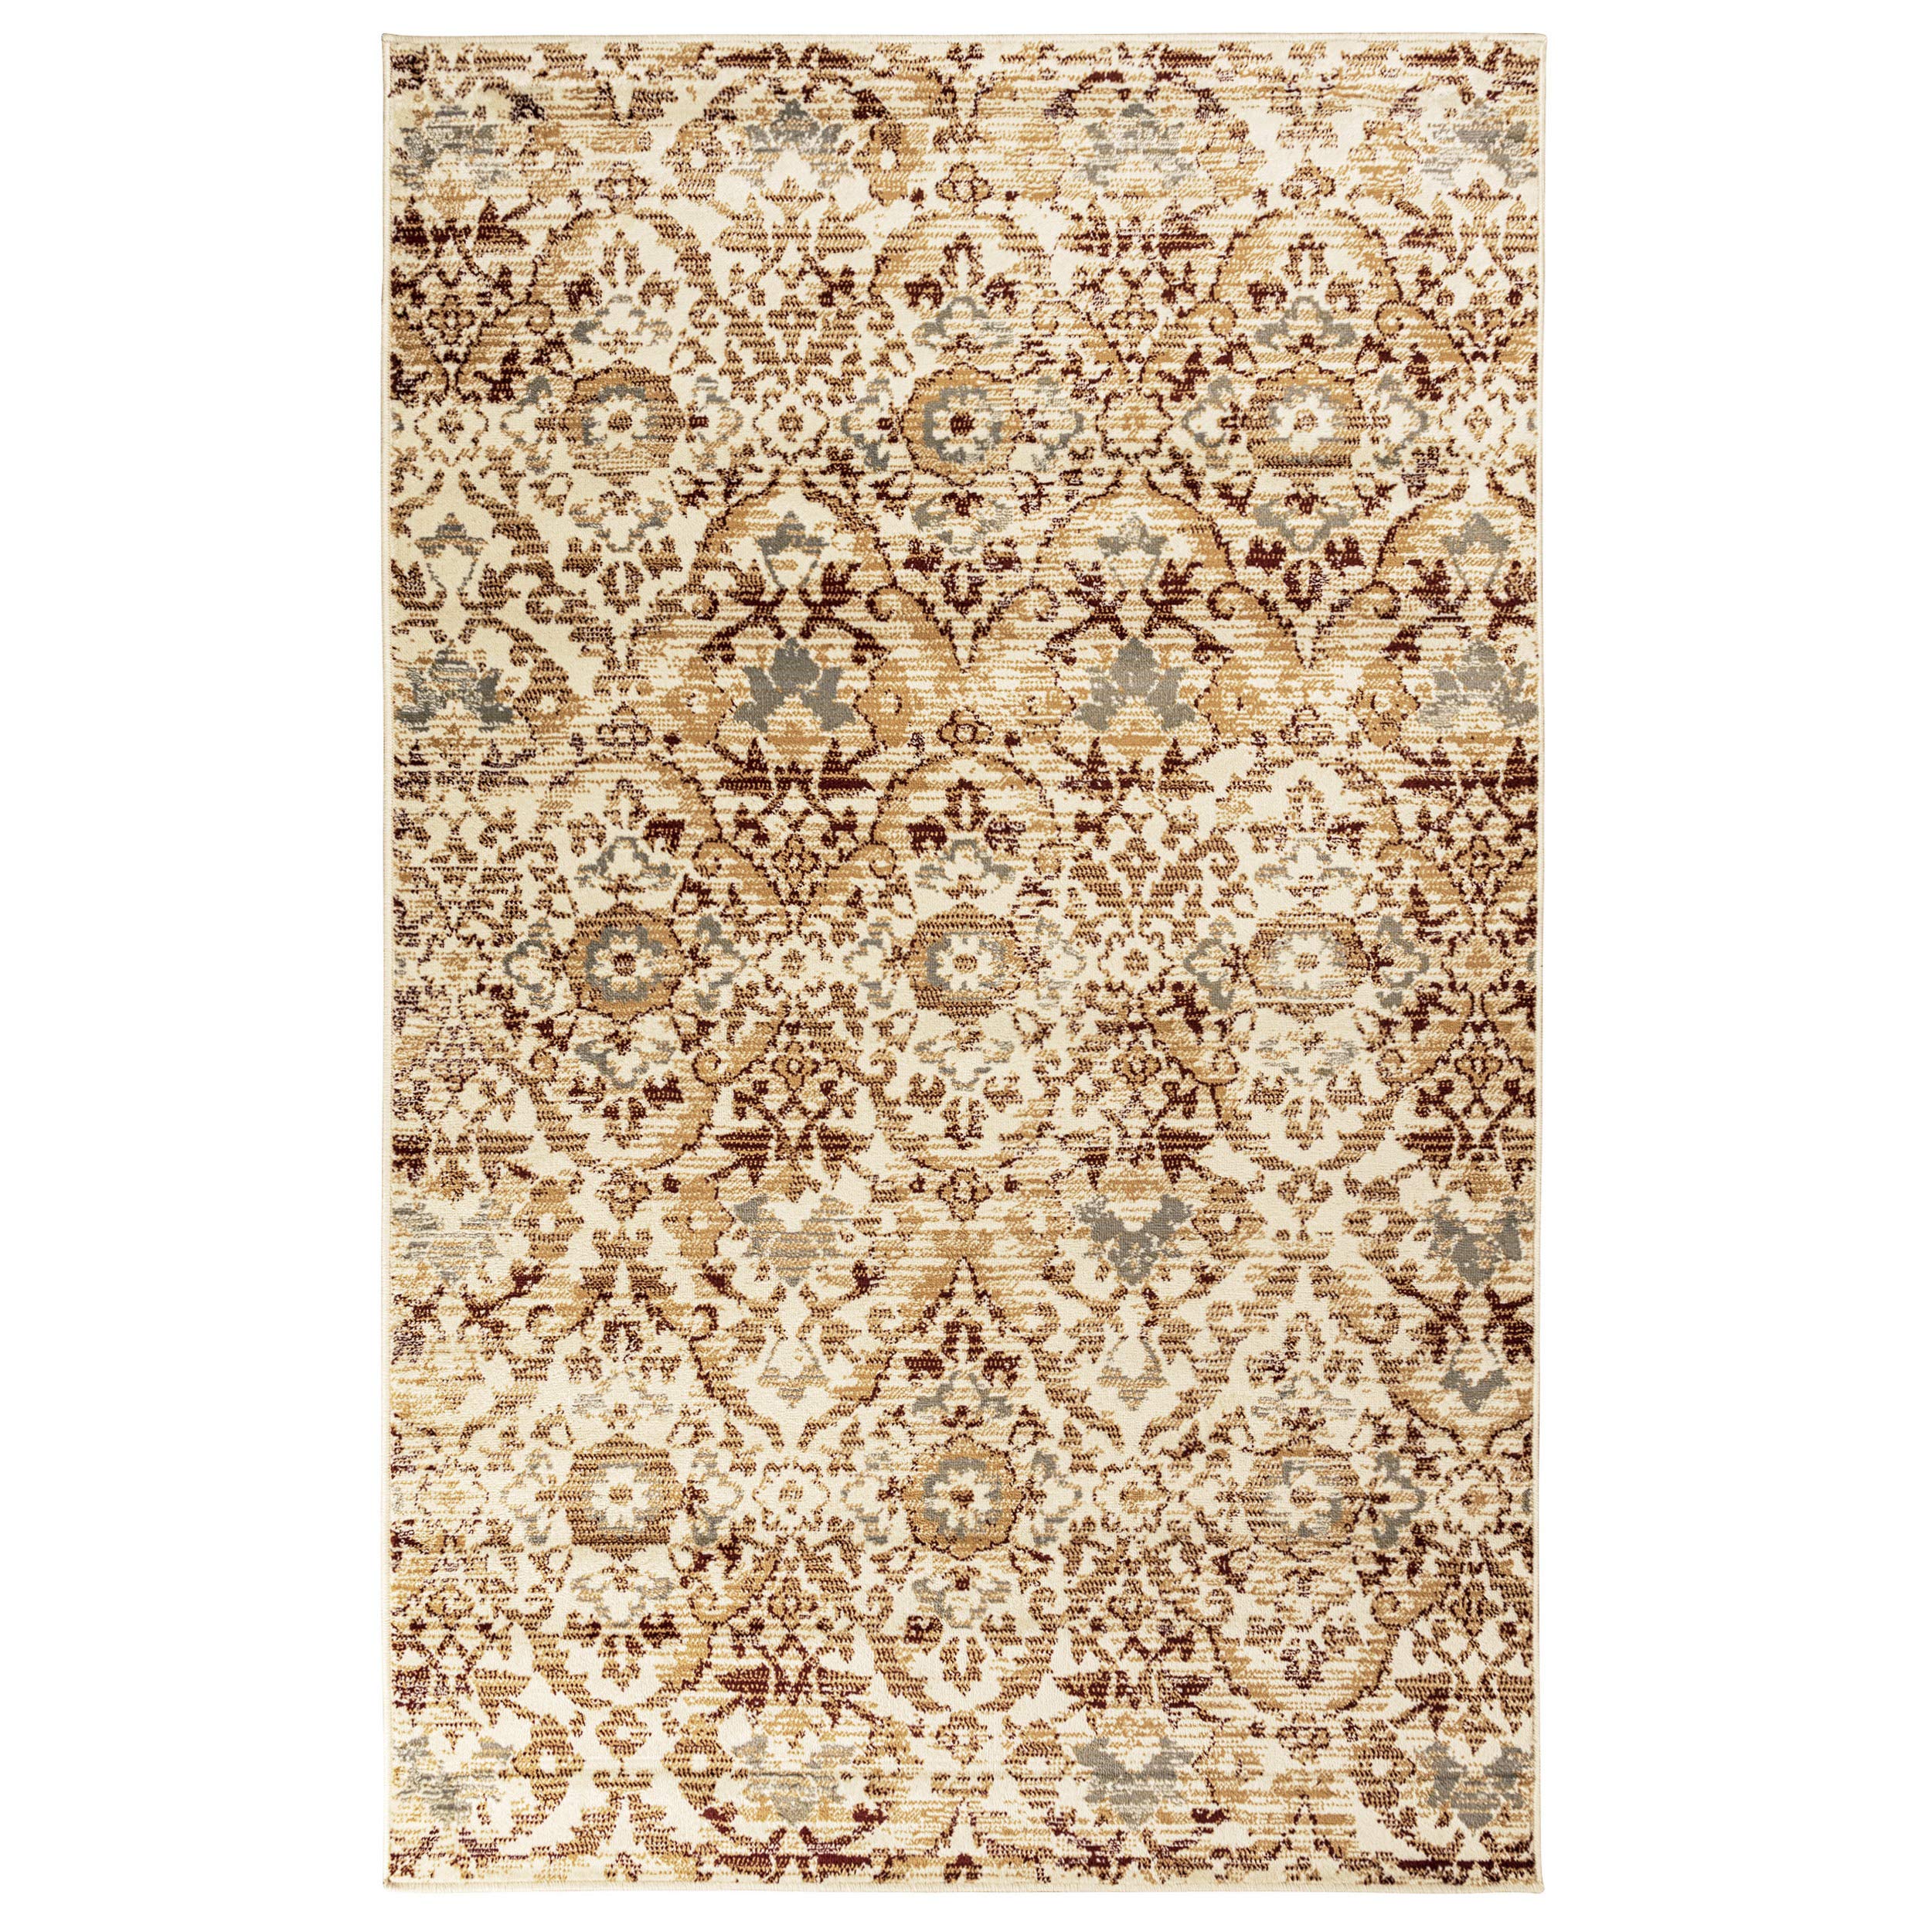 SUPERIOR Area Rugs for Bedroom, Farmhouse, Kitchen, Entryway, Laundry Room | Living Room Decor | Tamara Collection Tamara Attractive Rug with Jute Backing, Maroon - 5' x 8'